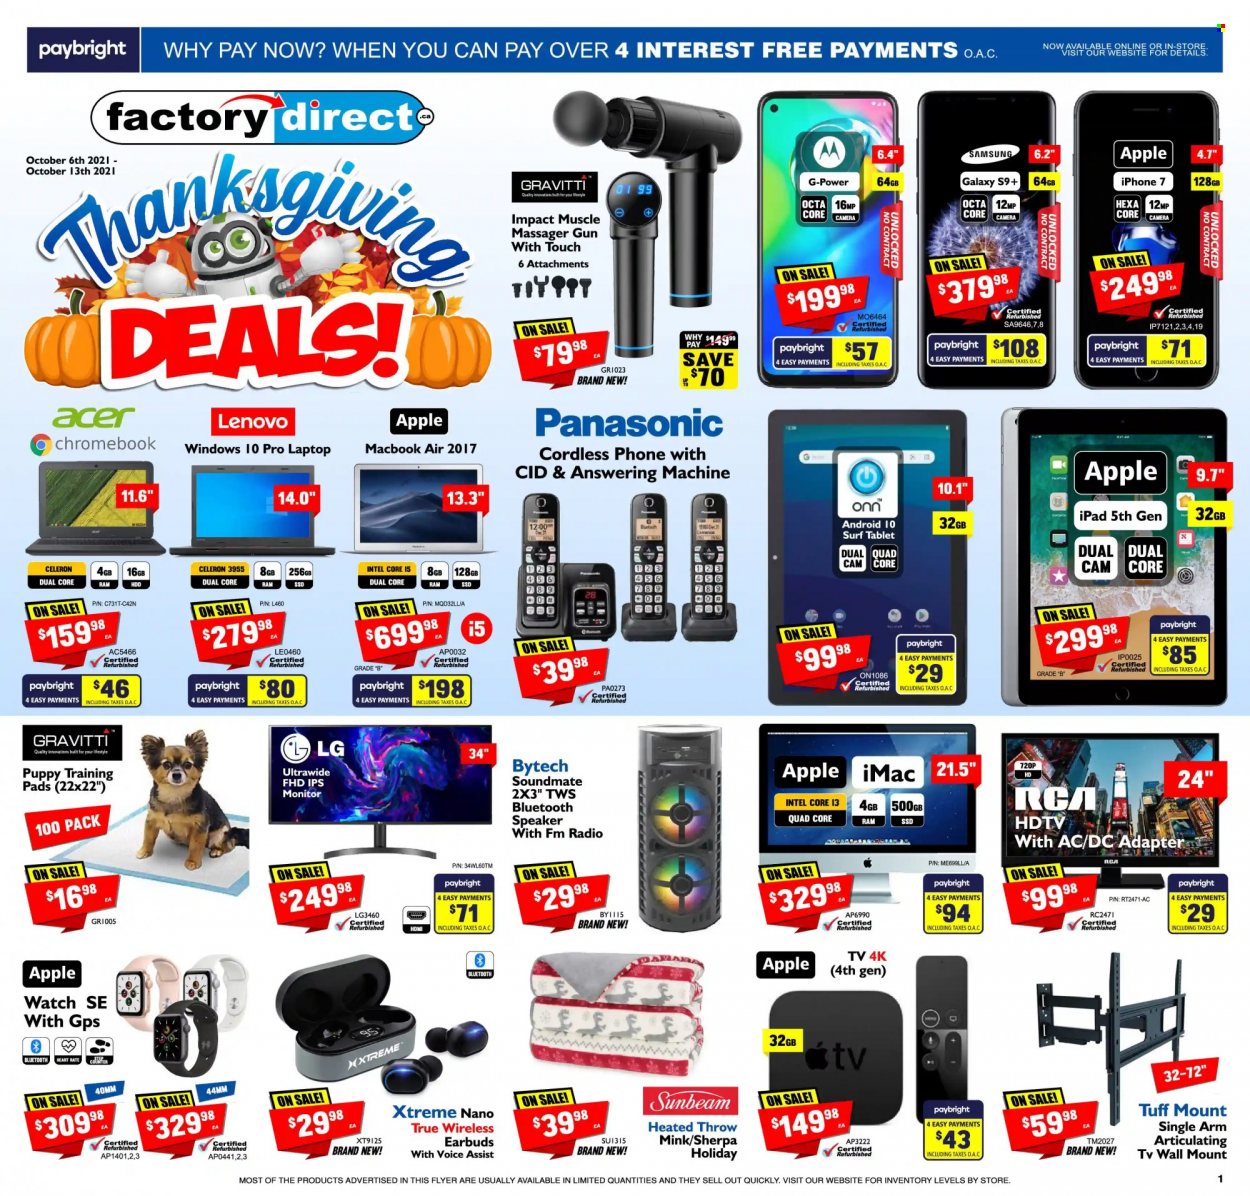 thumbnail - Factory Direct Flyer - October 06, 2021 - October 13, 2021 - Sales products - Intel, Apple, Acer, tablet, iPad, pin, Sunbeam, Samsung, iPhone, phone, laptop, chromebook, MacBook, iMac, MacBook Air, RCA, HDTV, TV, radio, speaker, bluetooth speaker, earbuds, adapter, tv wall mount, massager, heated throw, camera, Lenovo, LG, monitor, Panasonic, iPhone 7. Page 1.